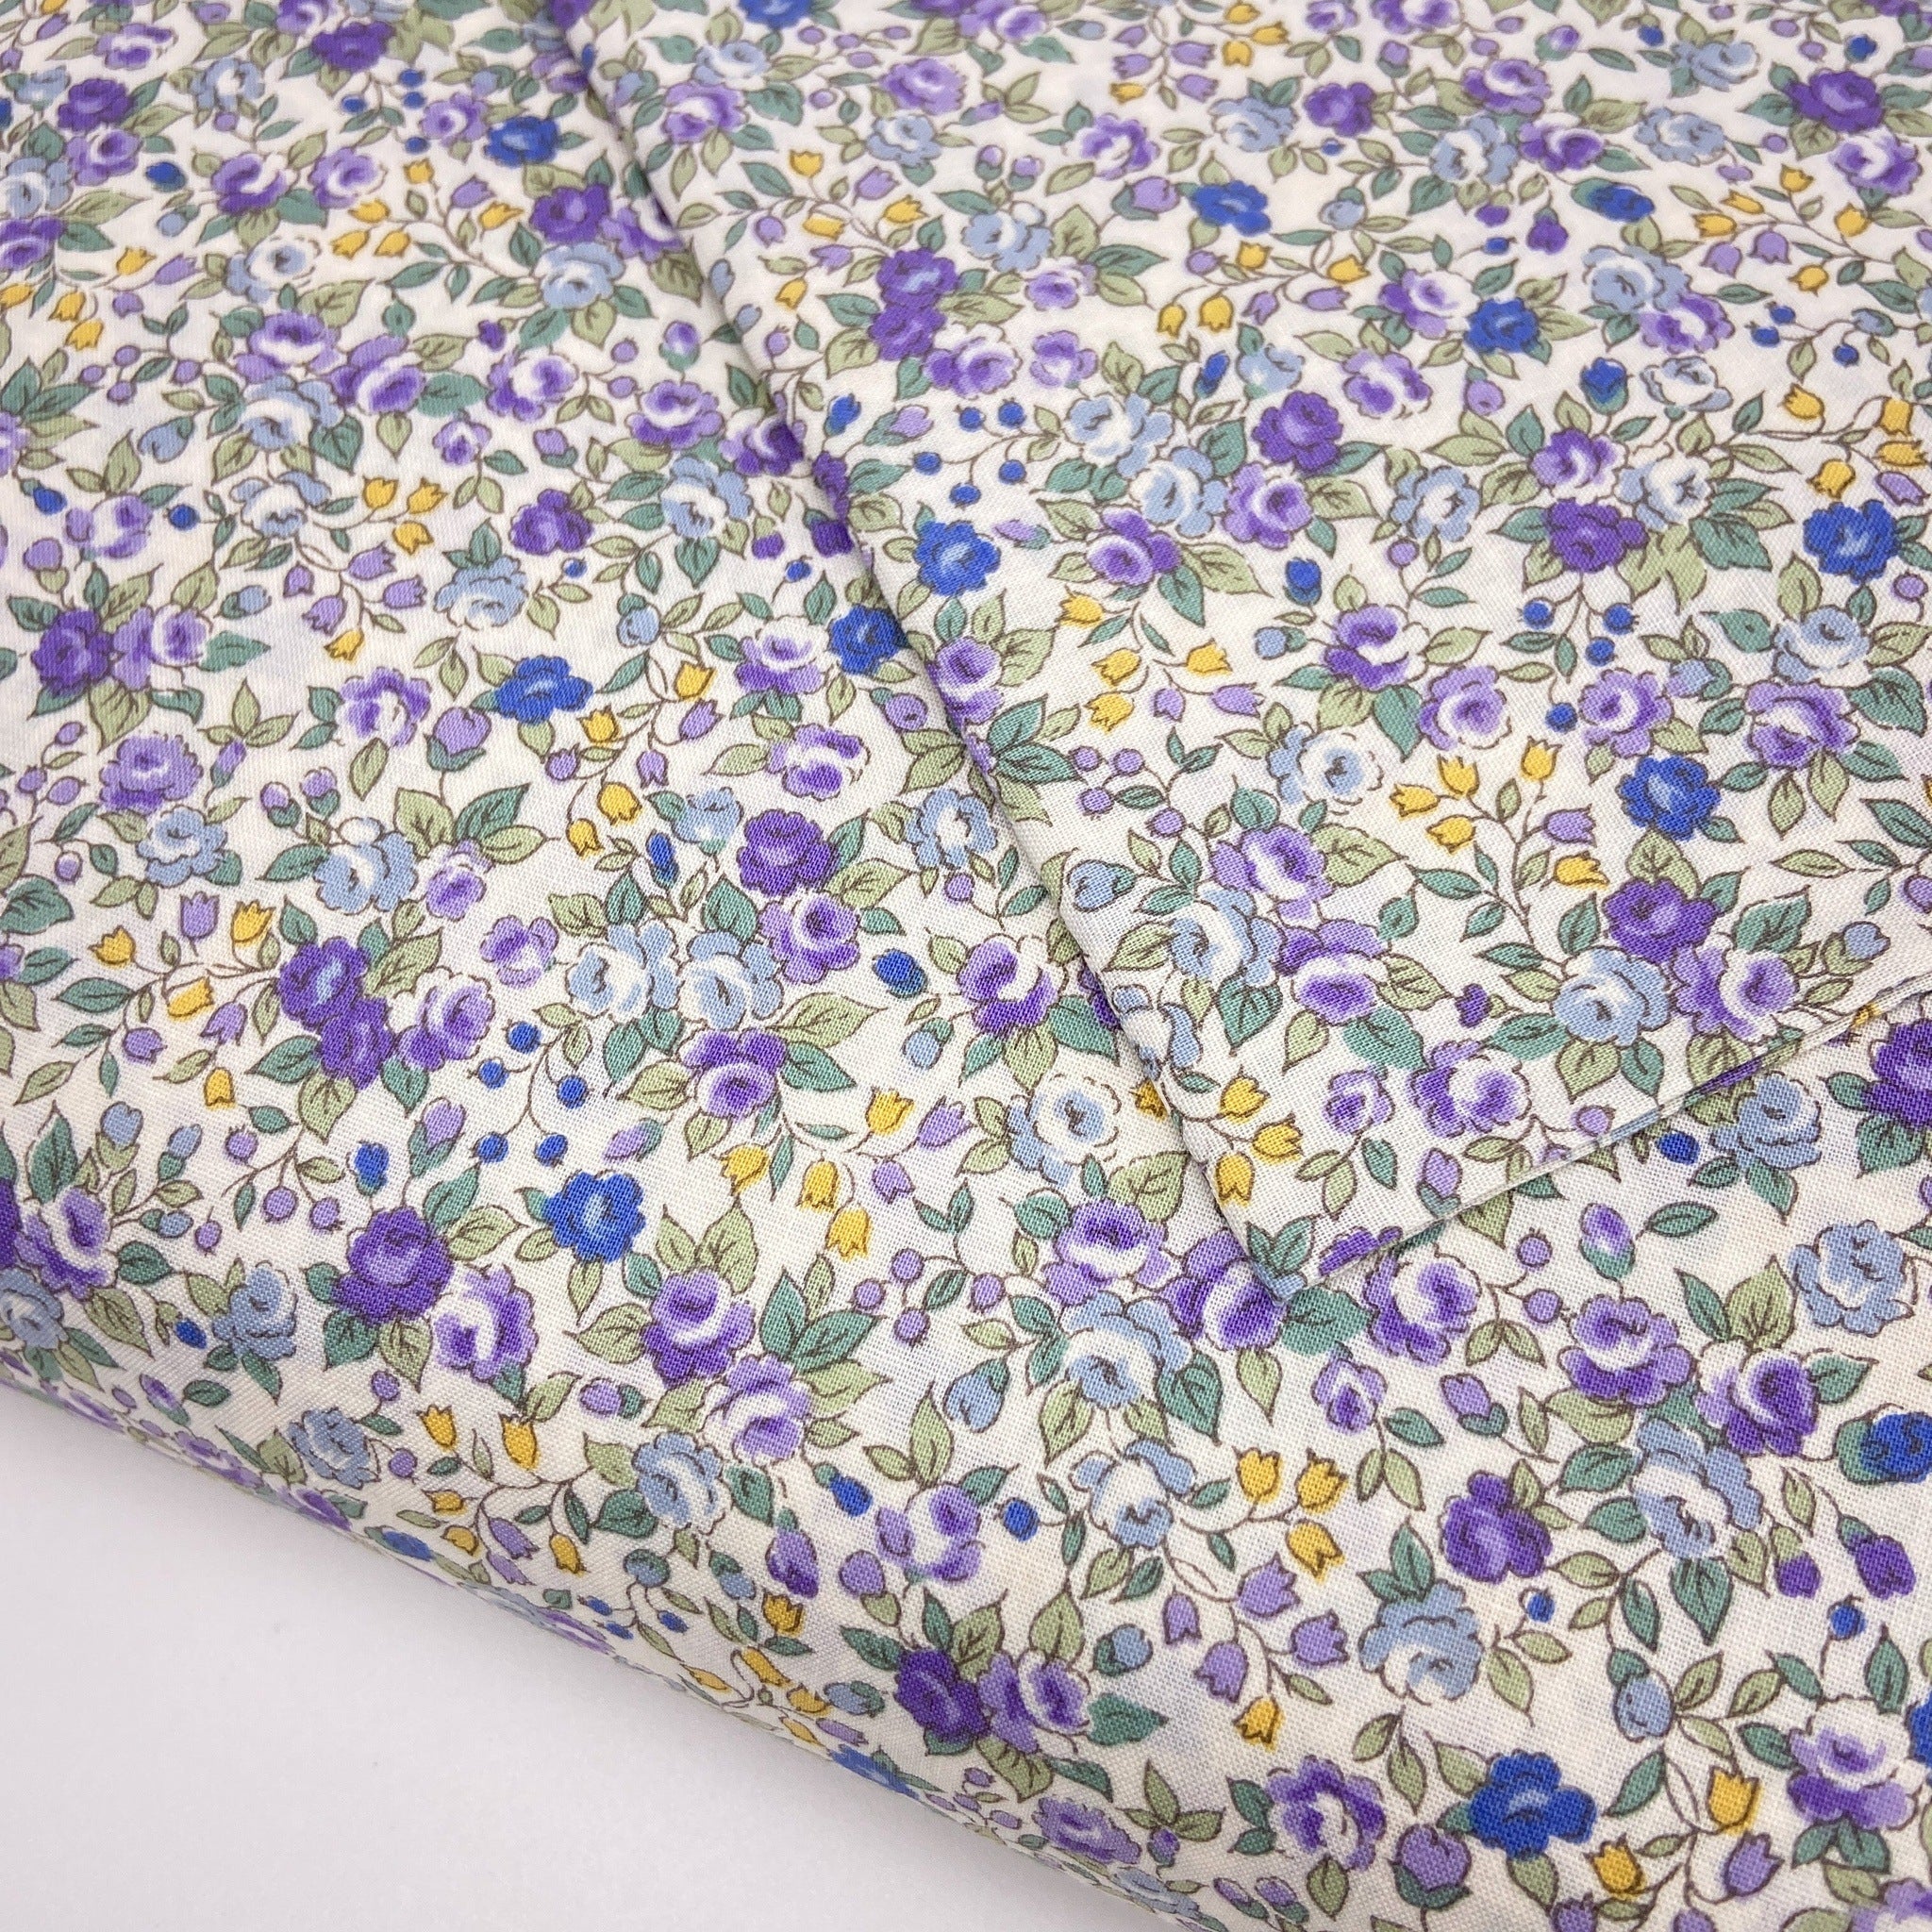 Japanese Cotton Broadcloth Print - Small Floral Purple